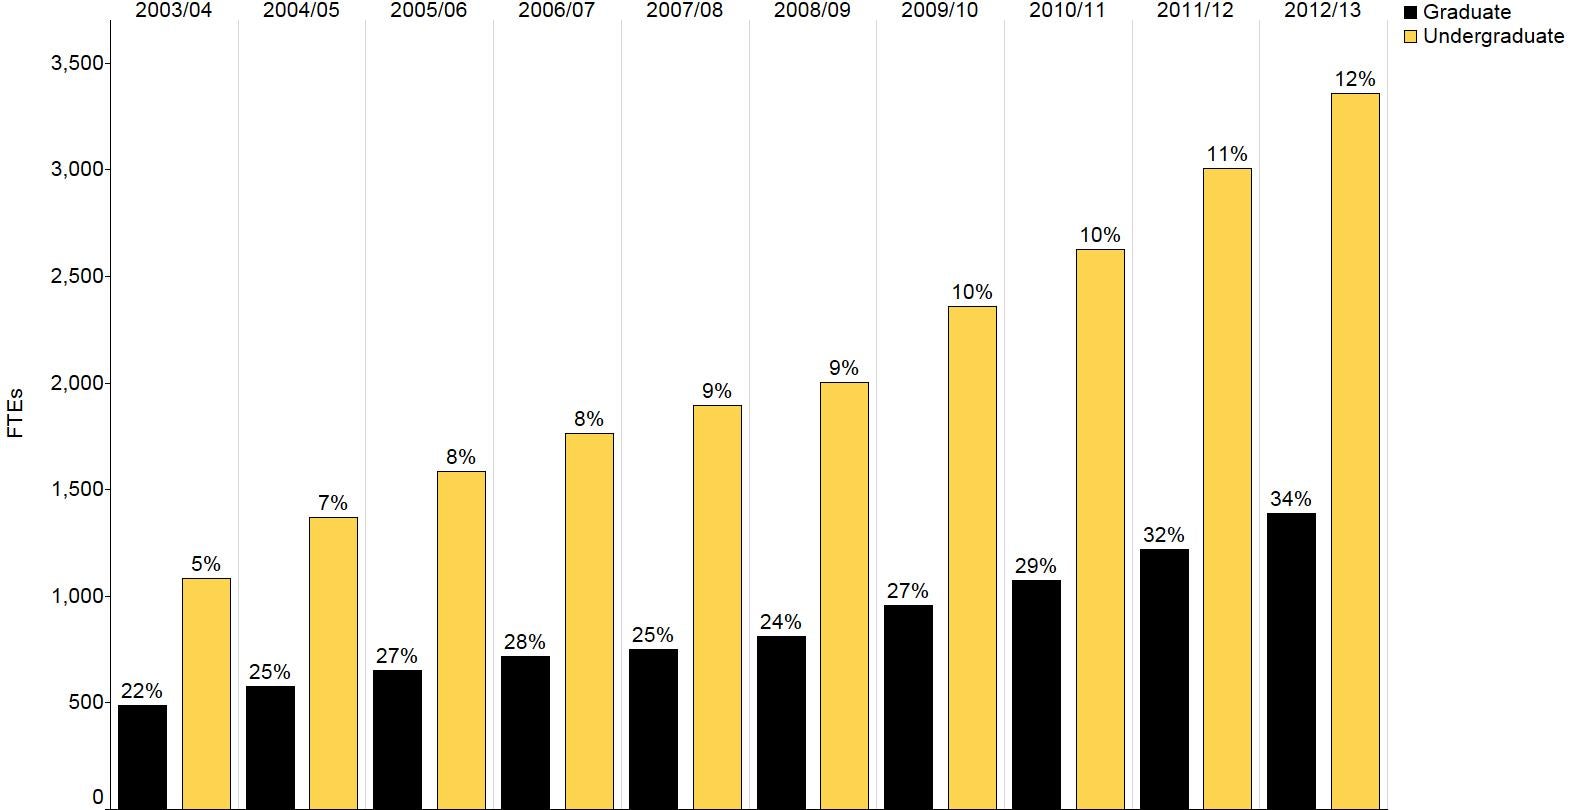 This figure shows the percentage of international students in graduate and undergraduate populations has increased between 2003/04 and 2012/13. Data for this figure are in the Data Table section.